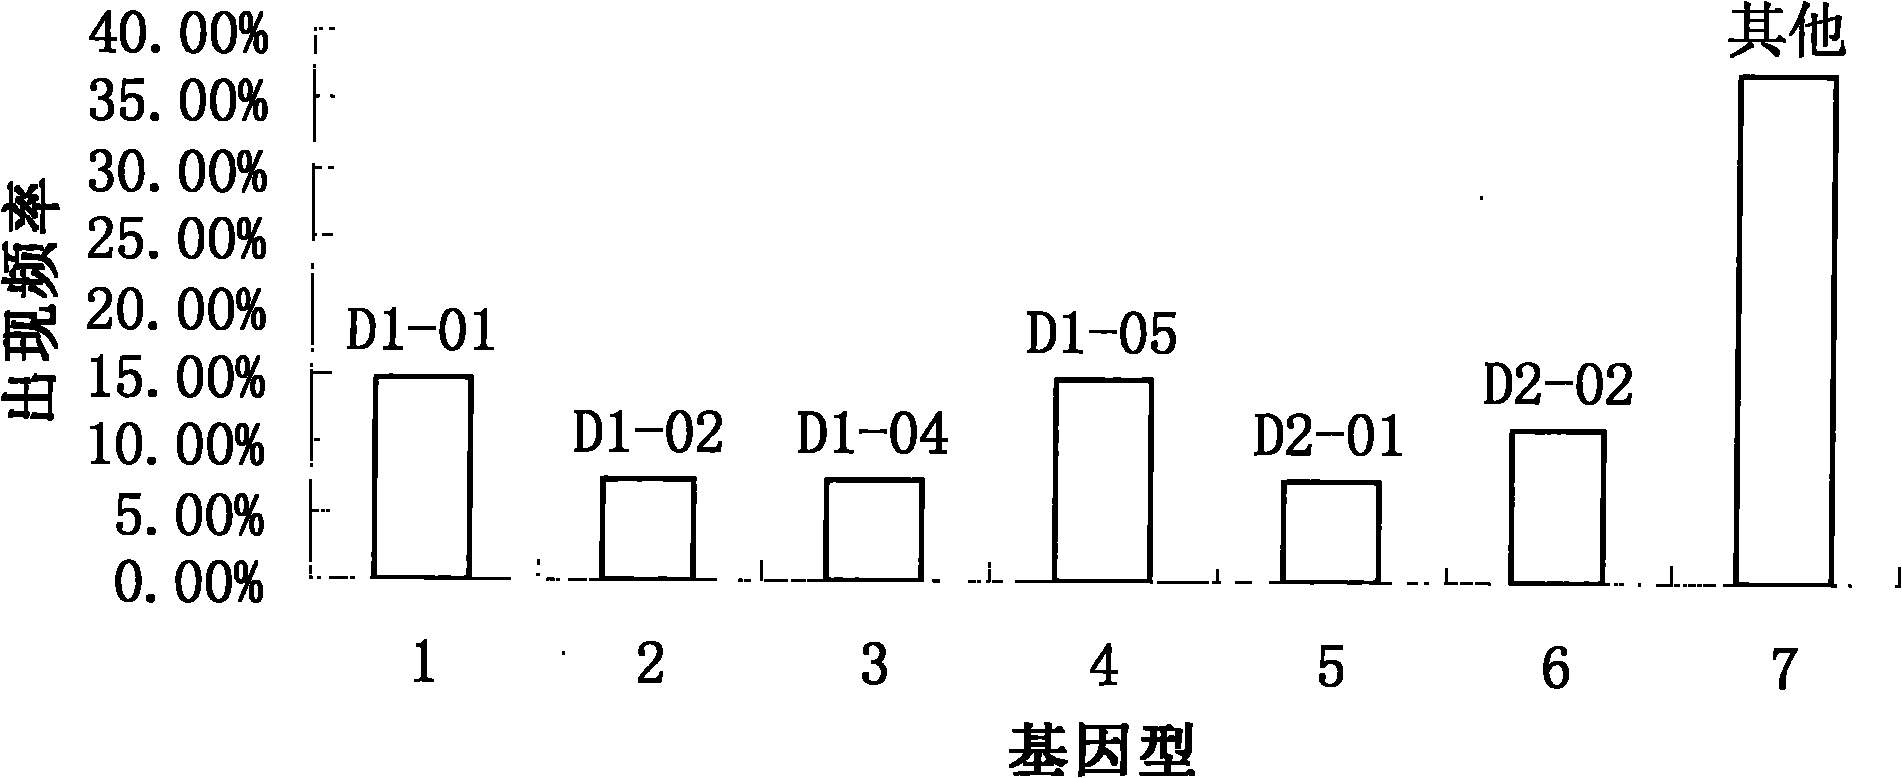 Garrupa MHC (Major Histocompatibility Complex) IIB gene as well as cloning method and application thereof